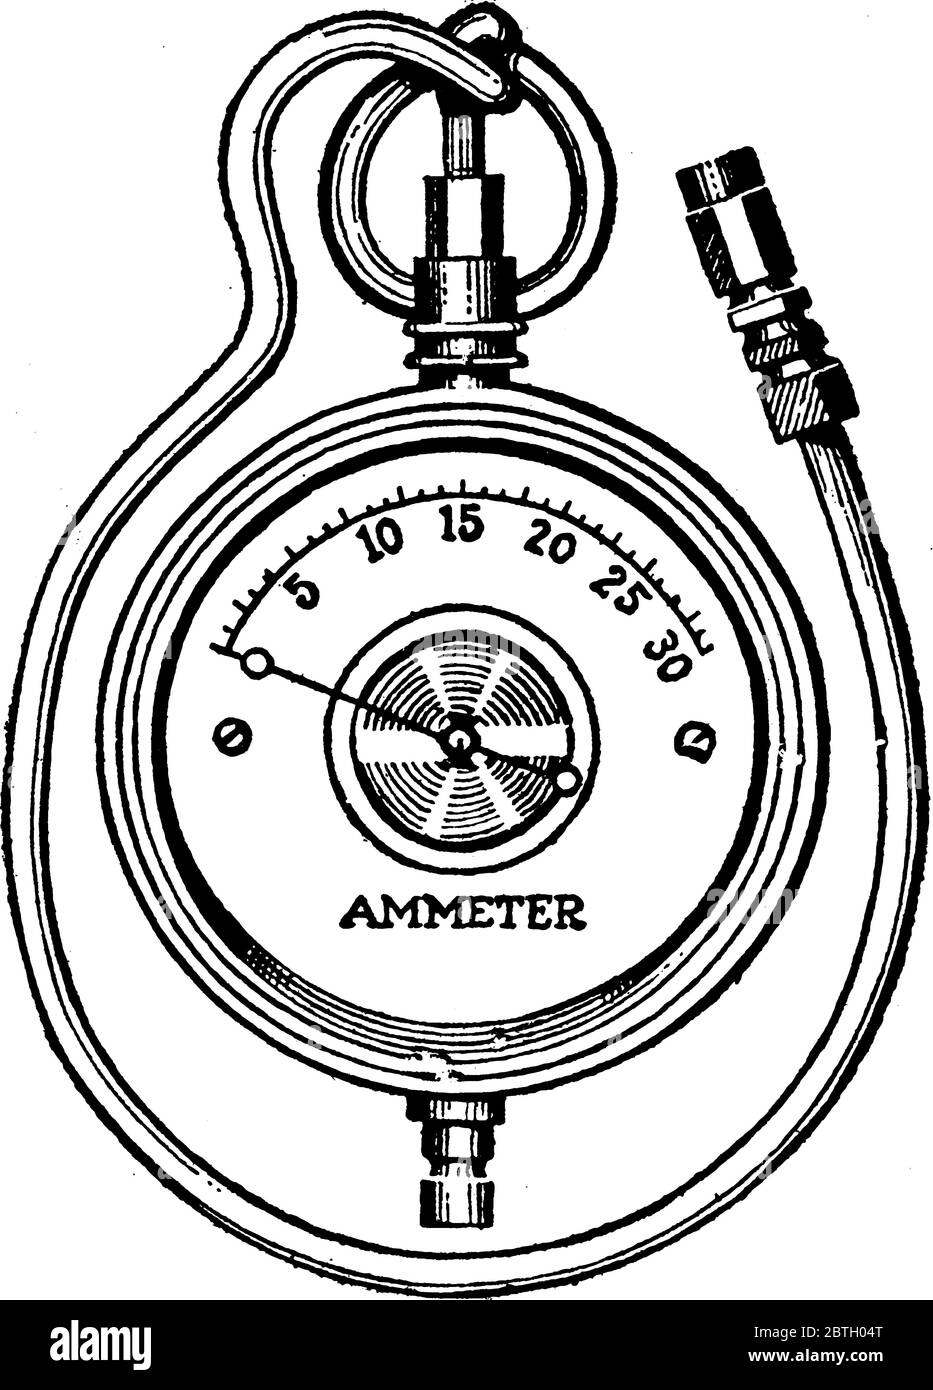 Ammeter is a tool having a pipe attached to round body used to test batteries, vintage line drawing or engraving illustration. Stock Vector